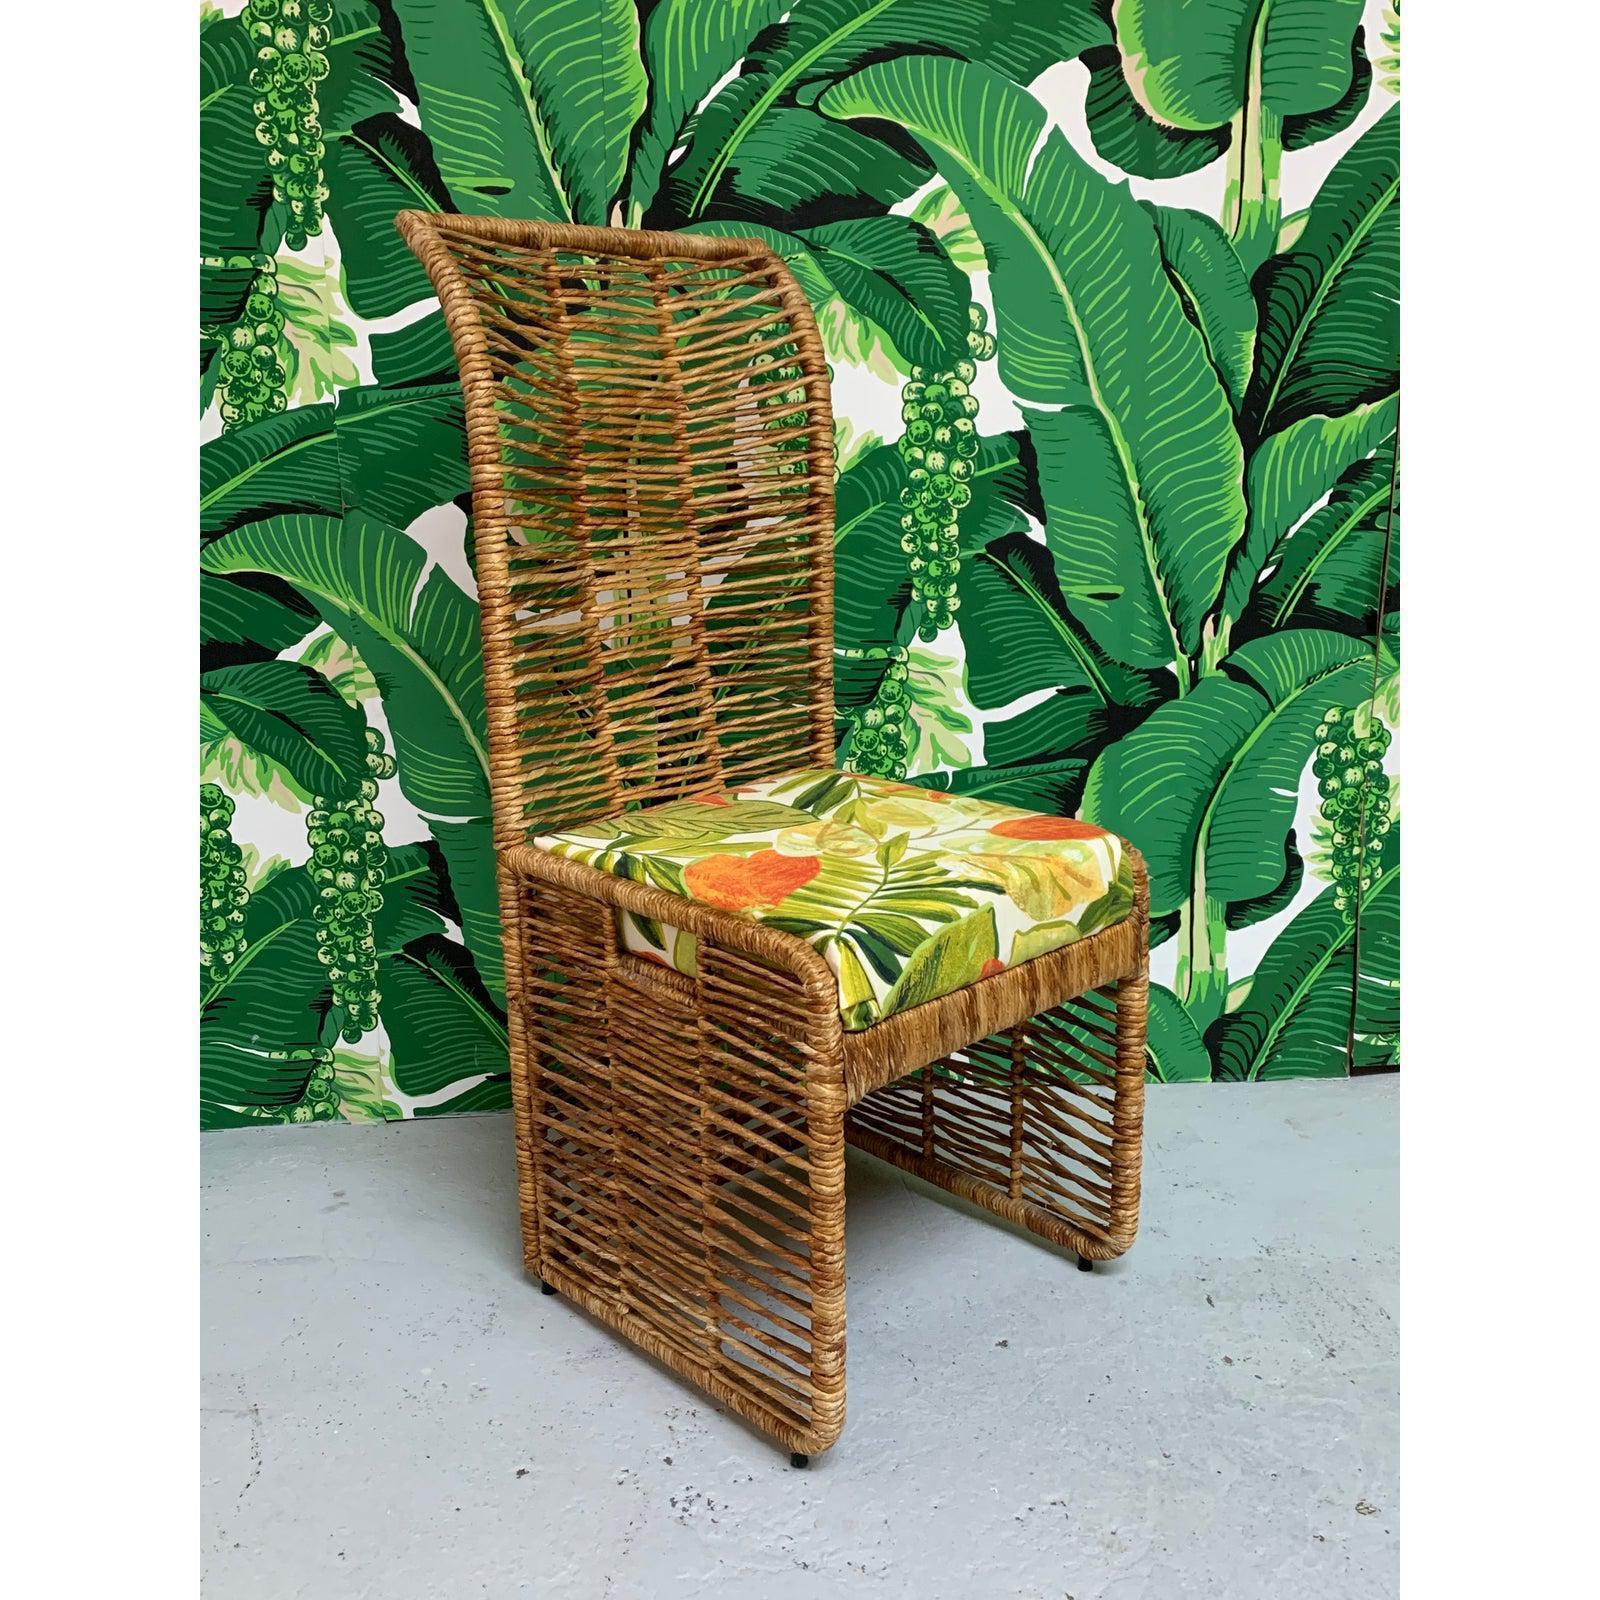 Unique set of 6 rattan rope wrapped dining chairs upholstered in a tropical palm leaf print. Steel frame construction, heavy and sturdy. Set consists of 2 arm chairs and 4 side chairs. Good vintage condition with imperfections consistent with age,